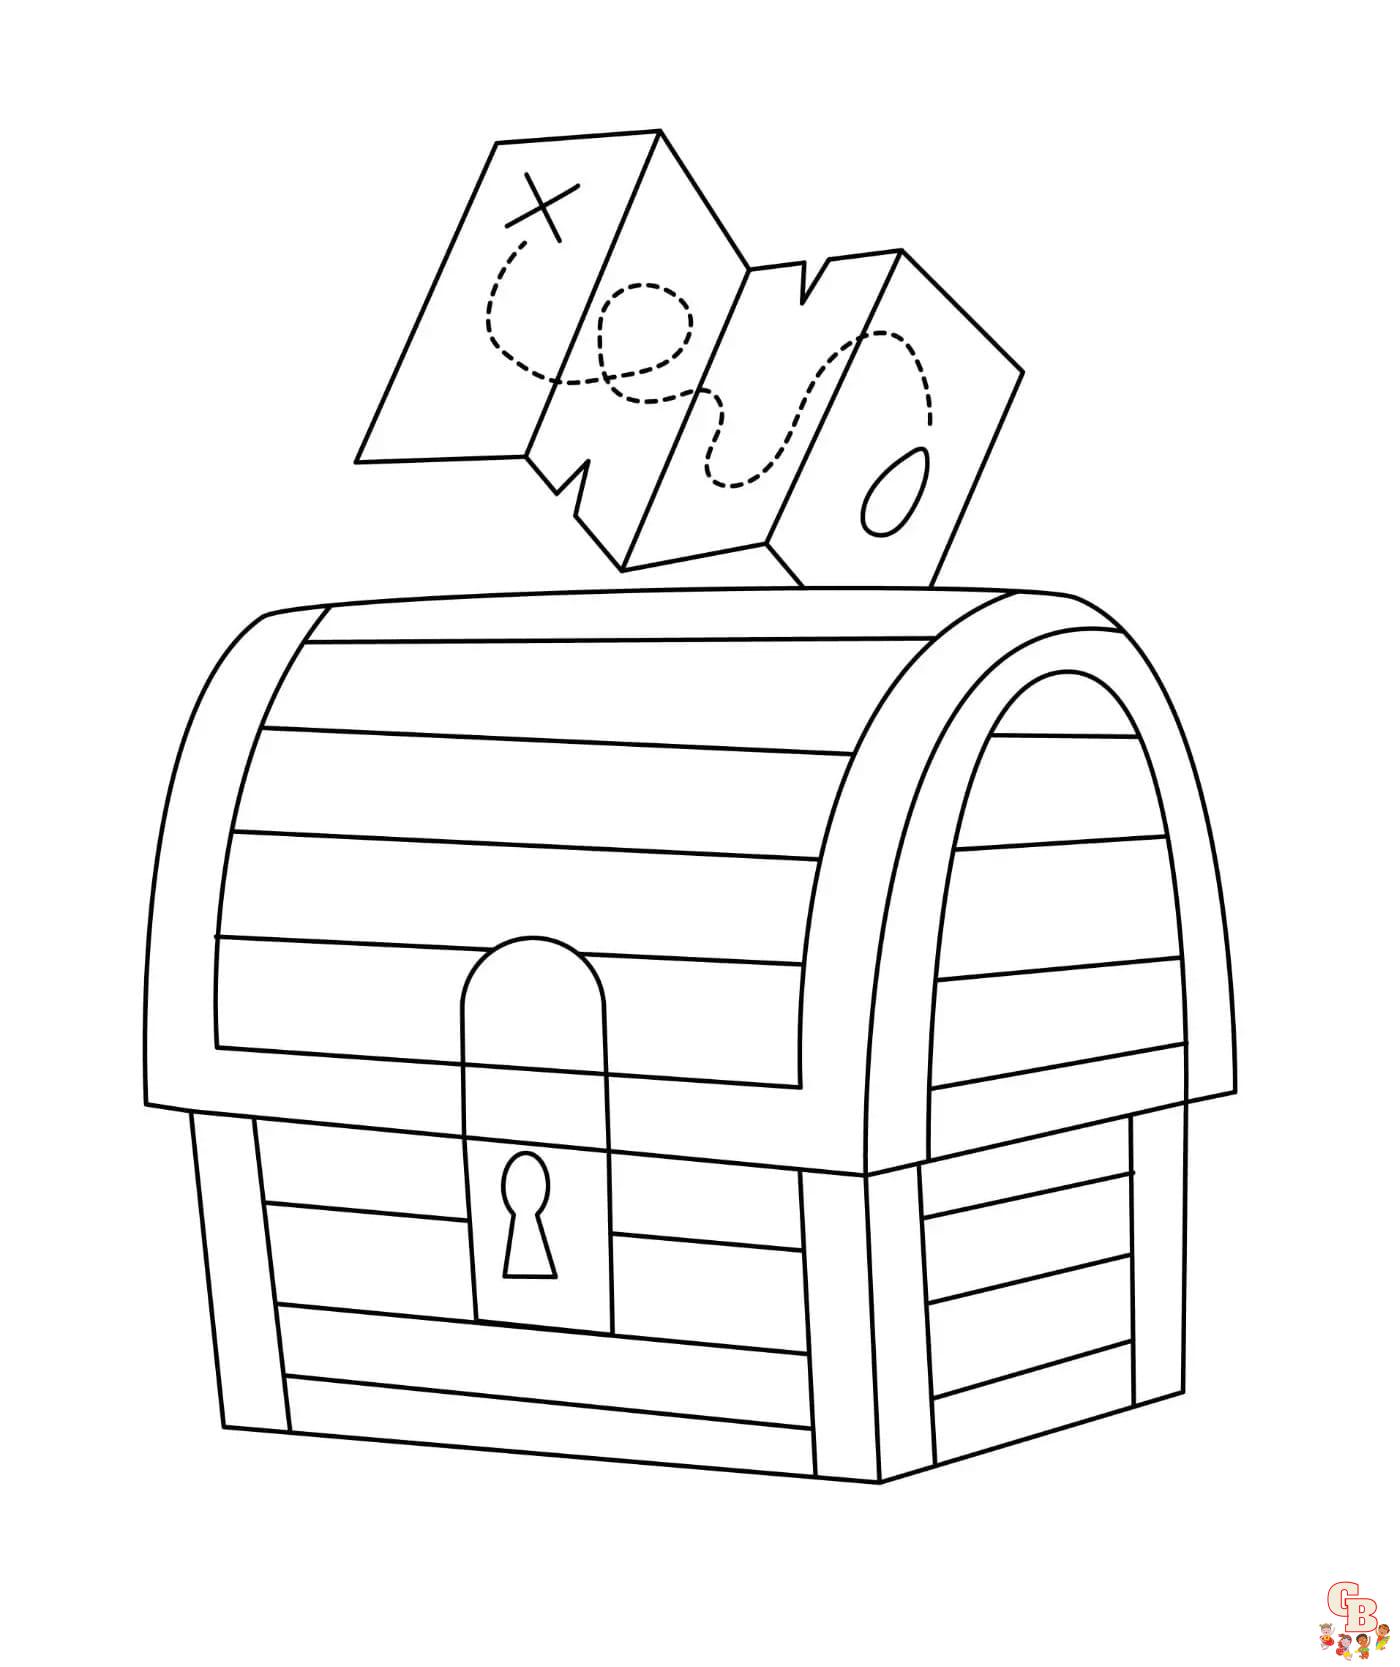 Printable treasure chest coloring pages free for kids and adults